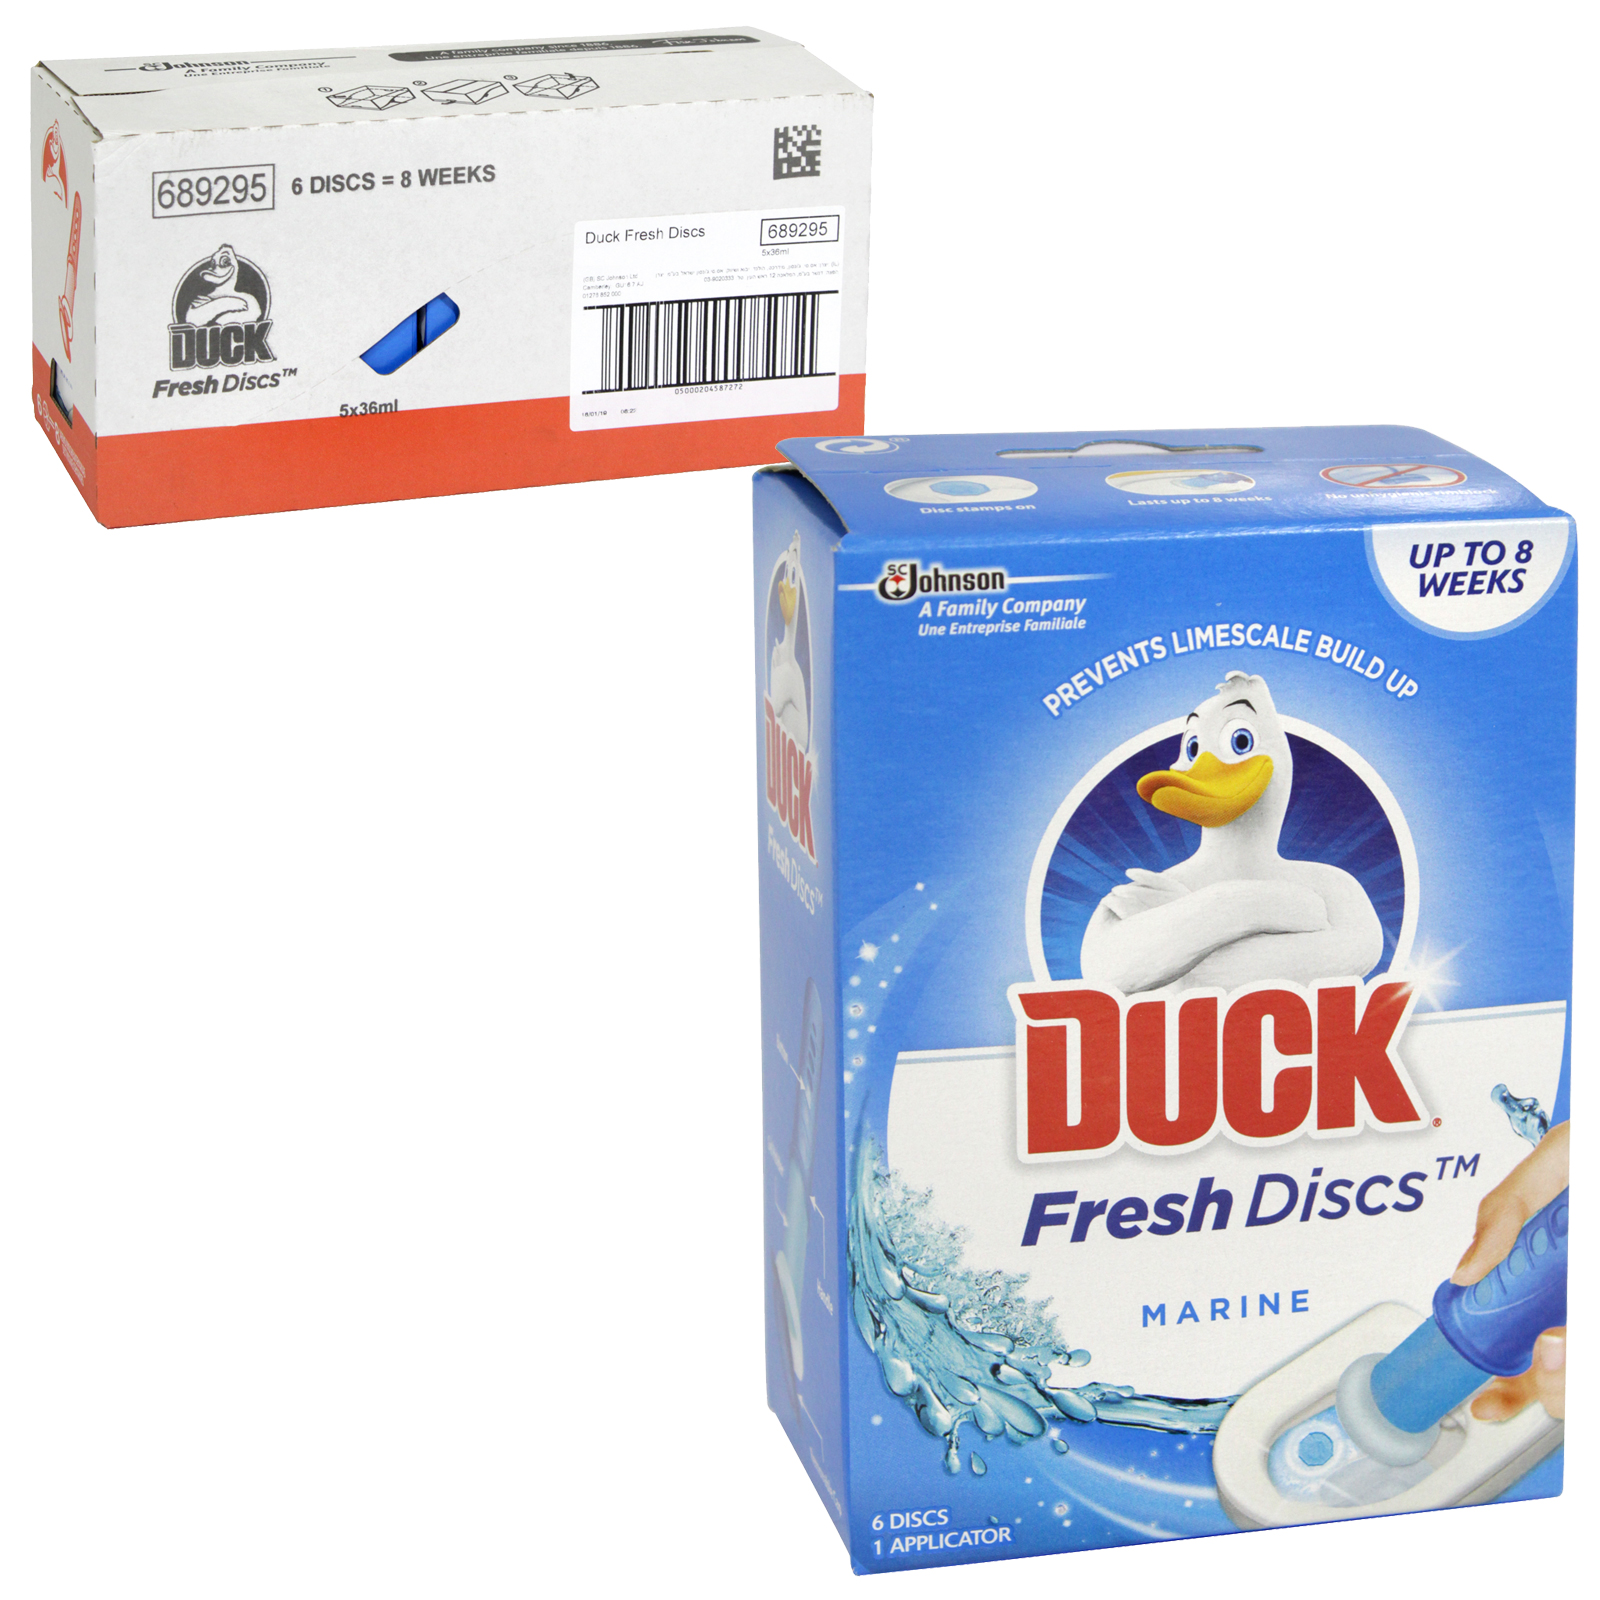 Duck Marine Fresh Discs 6 pack - Concord Cash and Carry